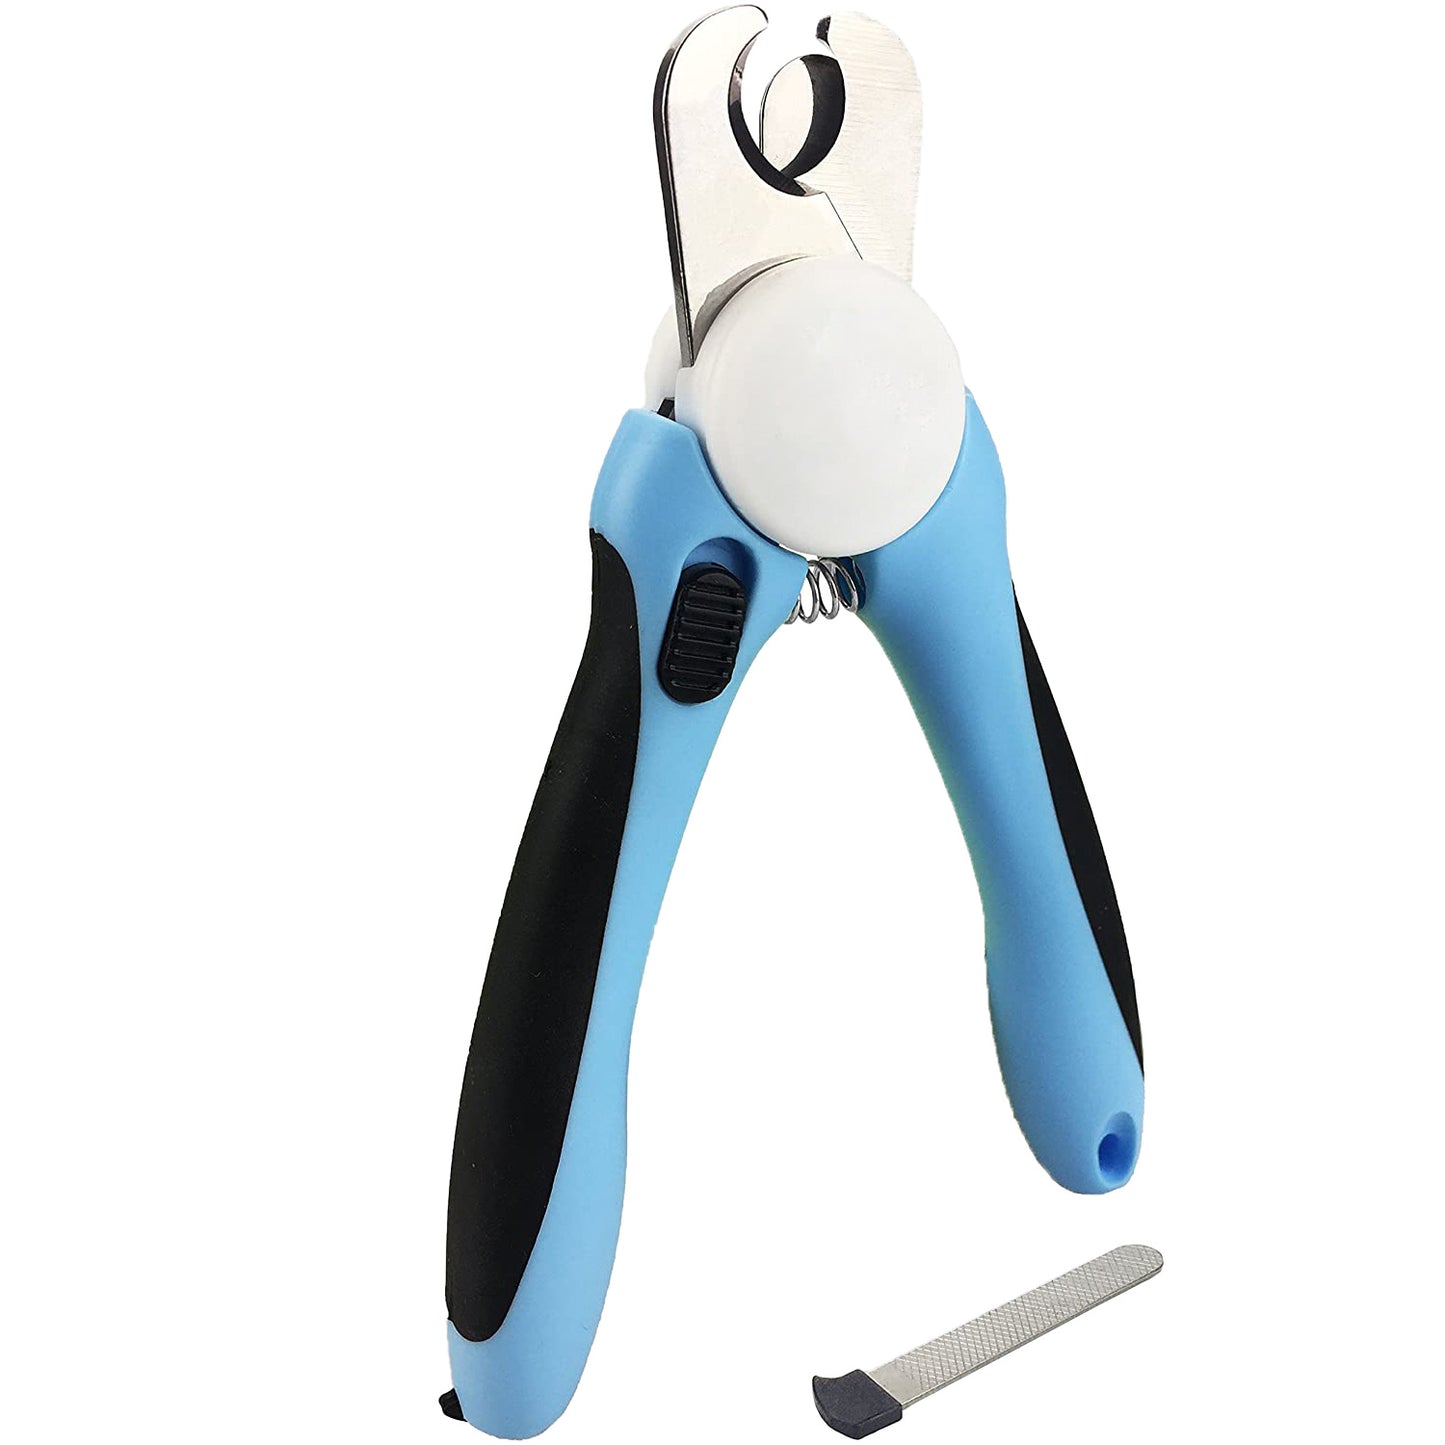 Dog Nail Clipper with Safety Guard to Avoid Over Cutting